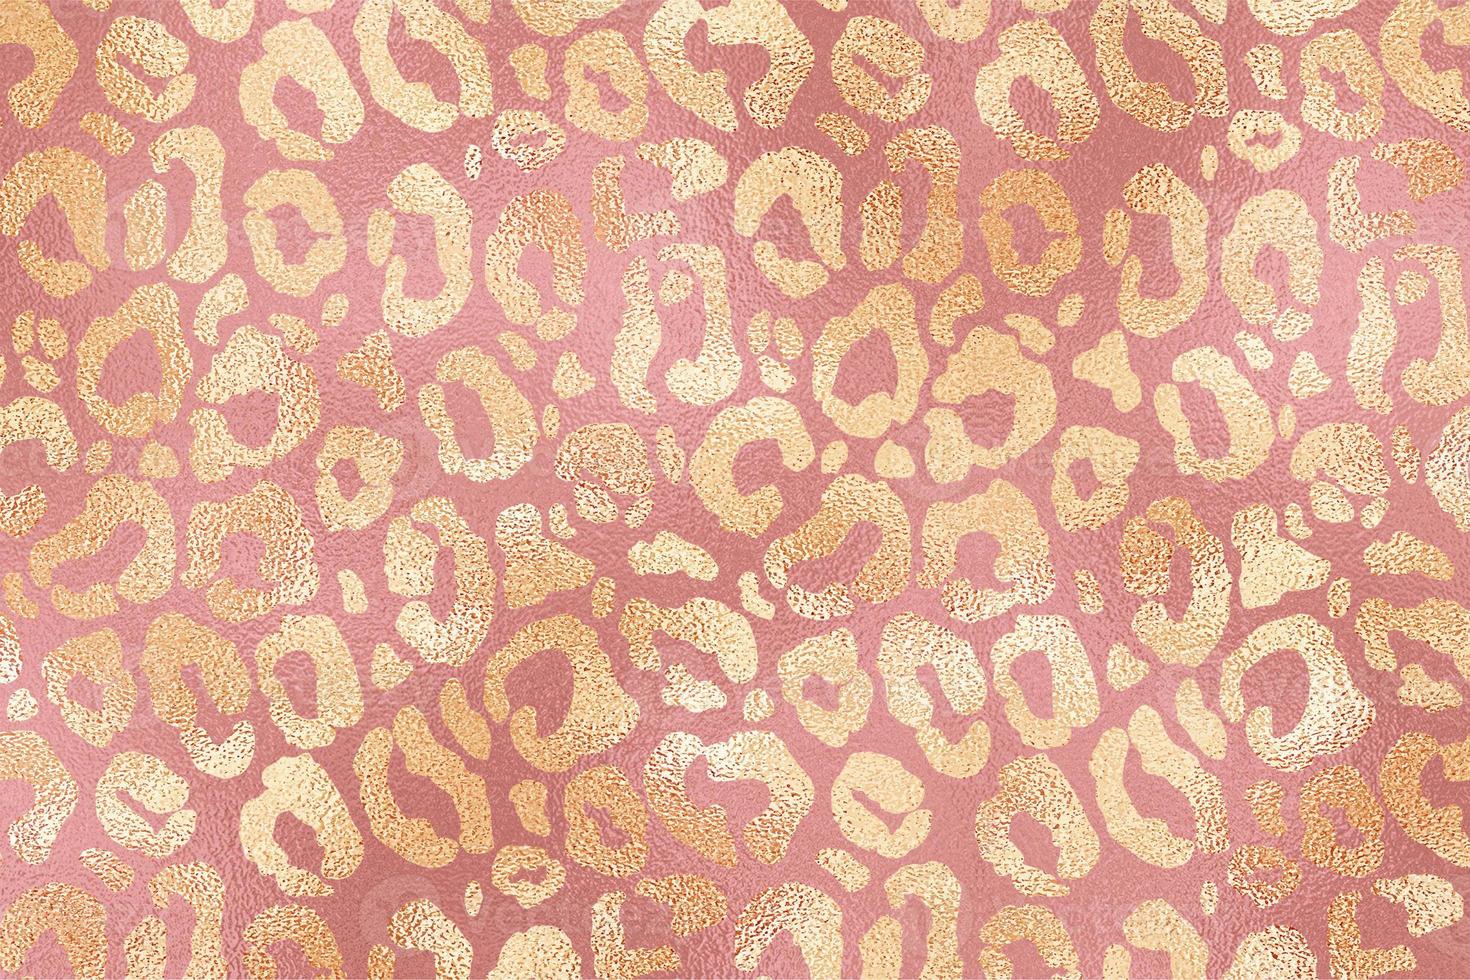 Gold and Pink Glam Glitter Animal Skin Texture Background, Animal Skin ...